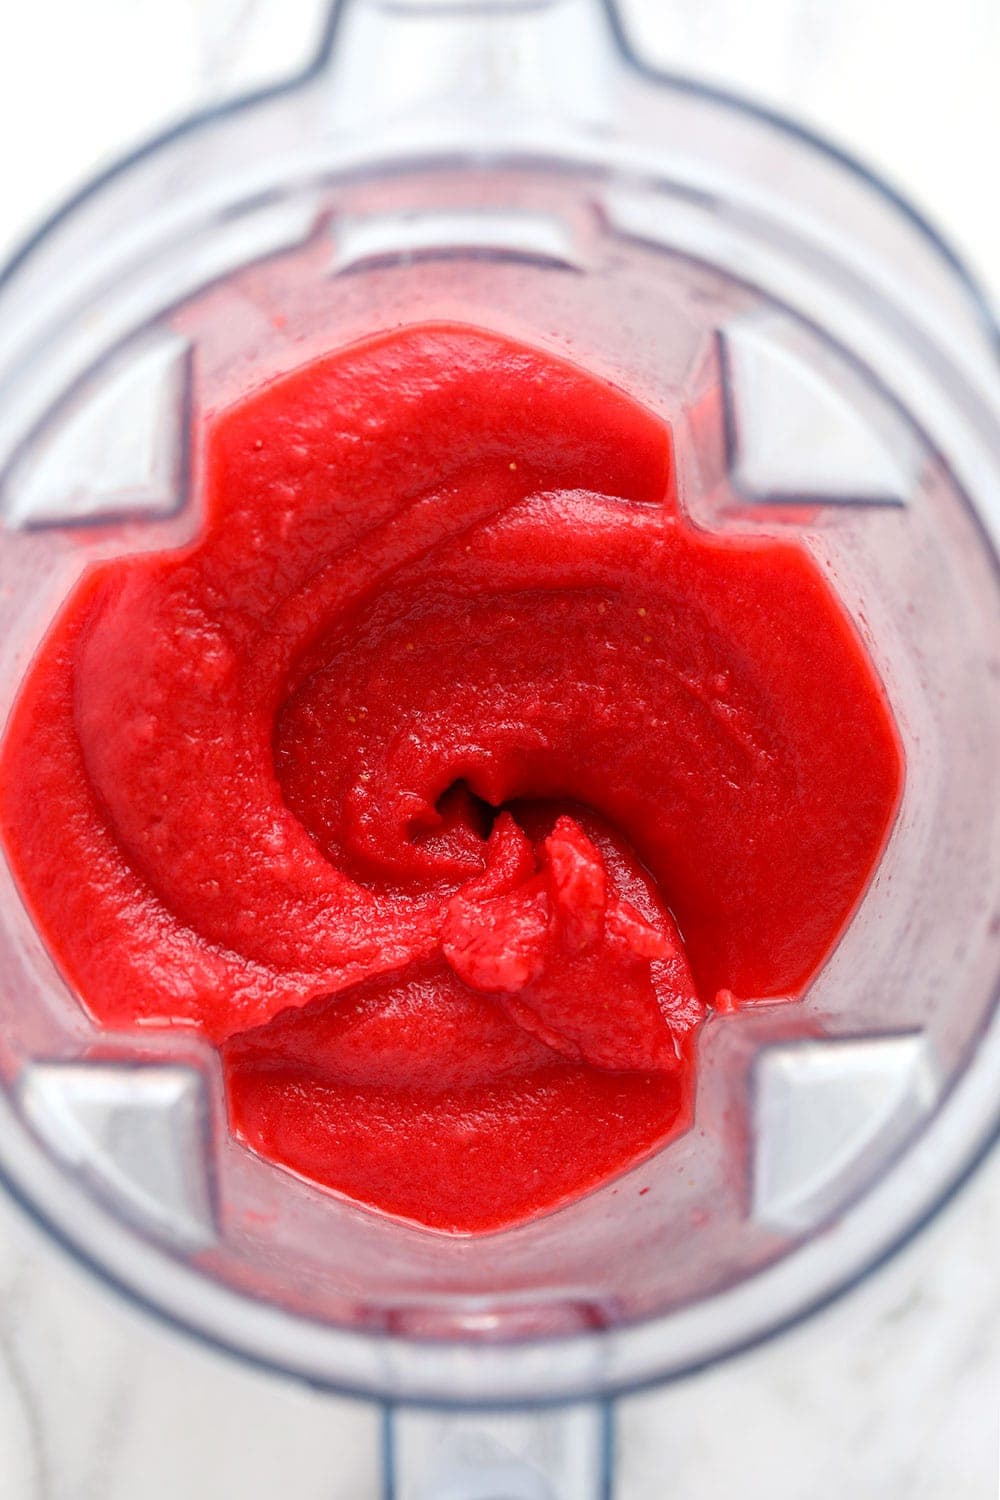 blended strawberry daiquiris in a blender